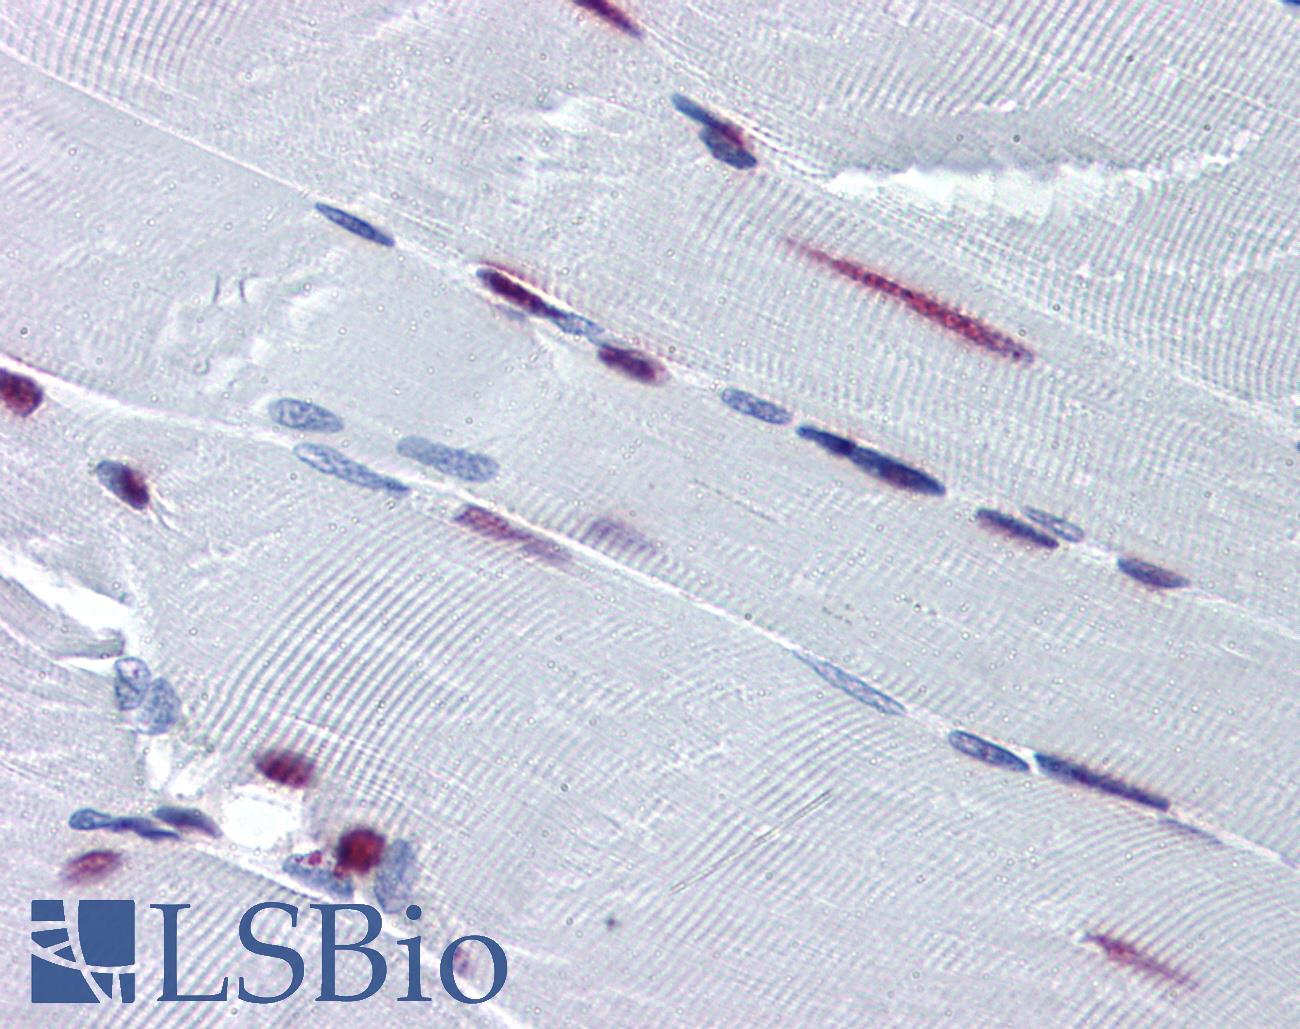 SF1 Antibody - Anti-SF1 antibody IHC of human skeletal muscle. Immunohistochemistry of formalin-fixed, paraffin-embedded tissue after heat-induced antigen retrieval. Antibody concentration 5 ug/ml.